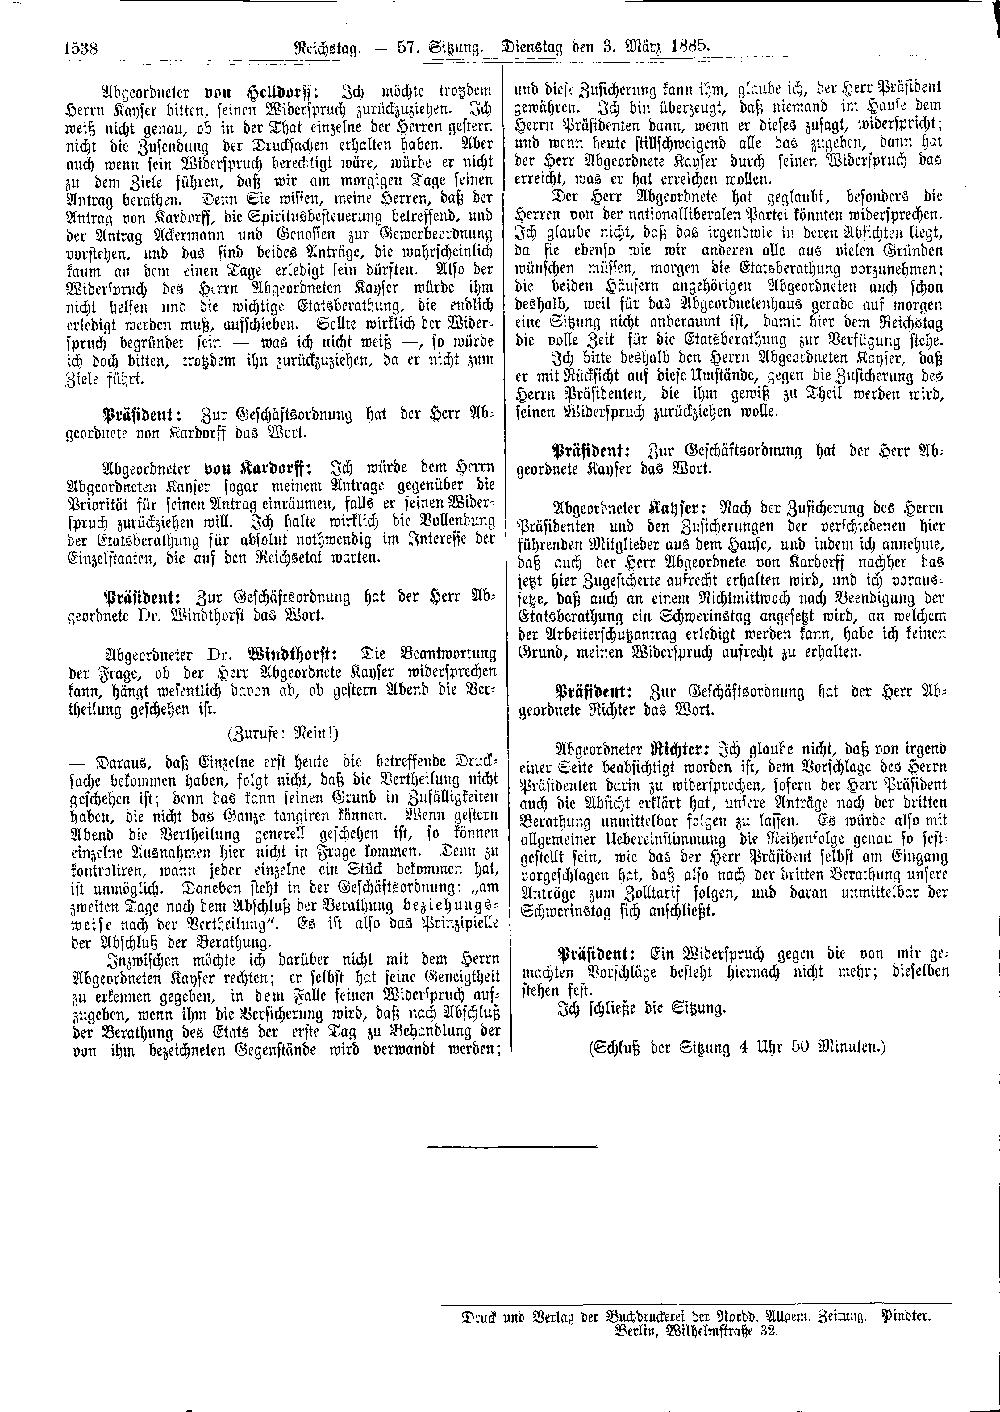 Scan of page 1538